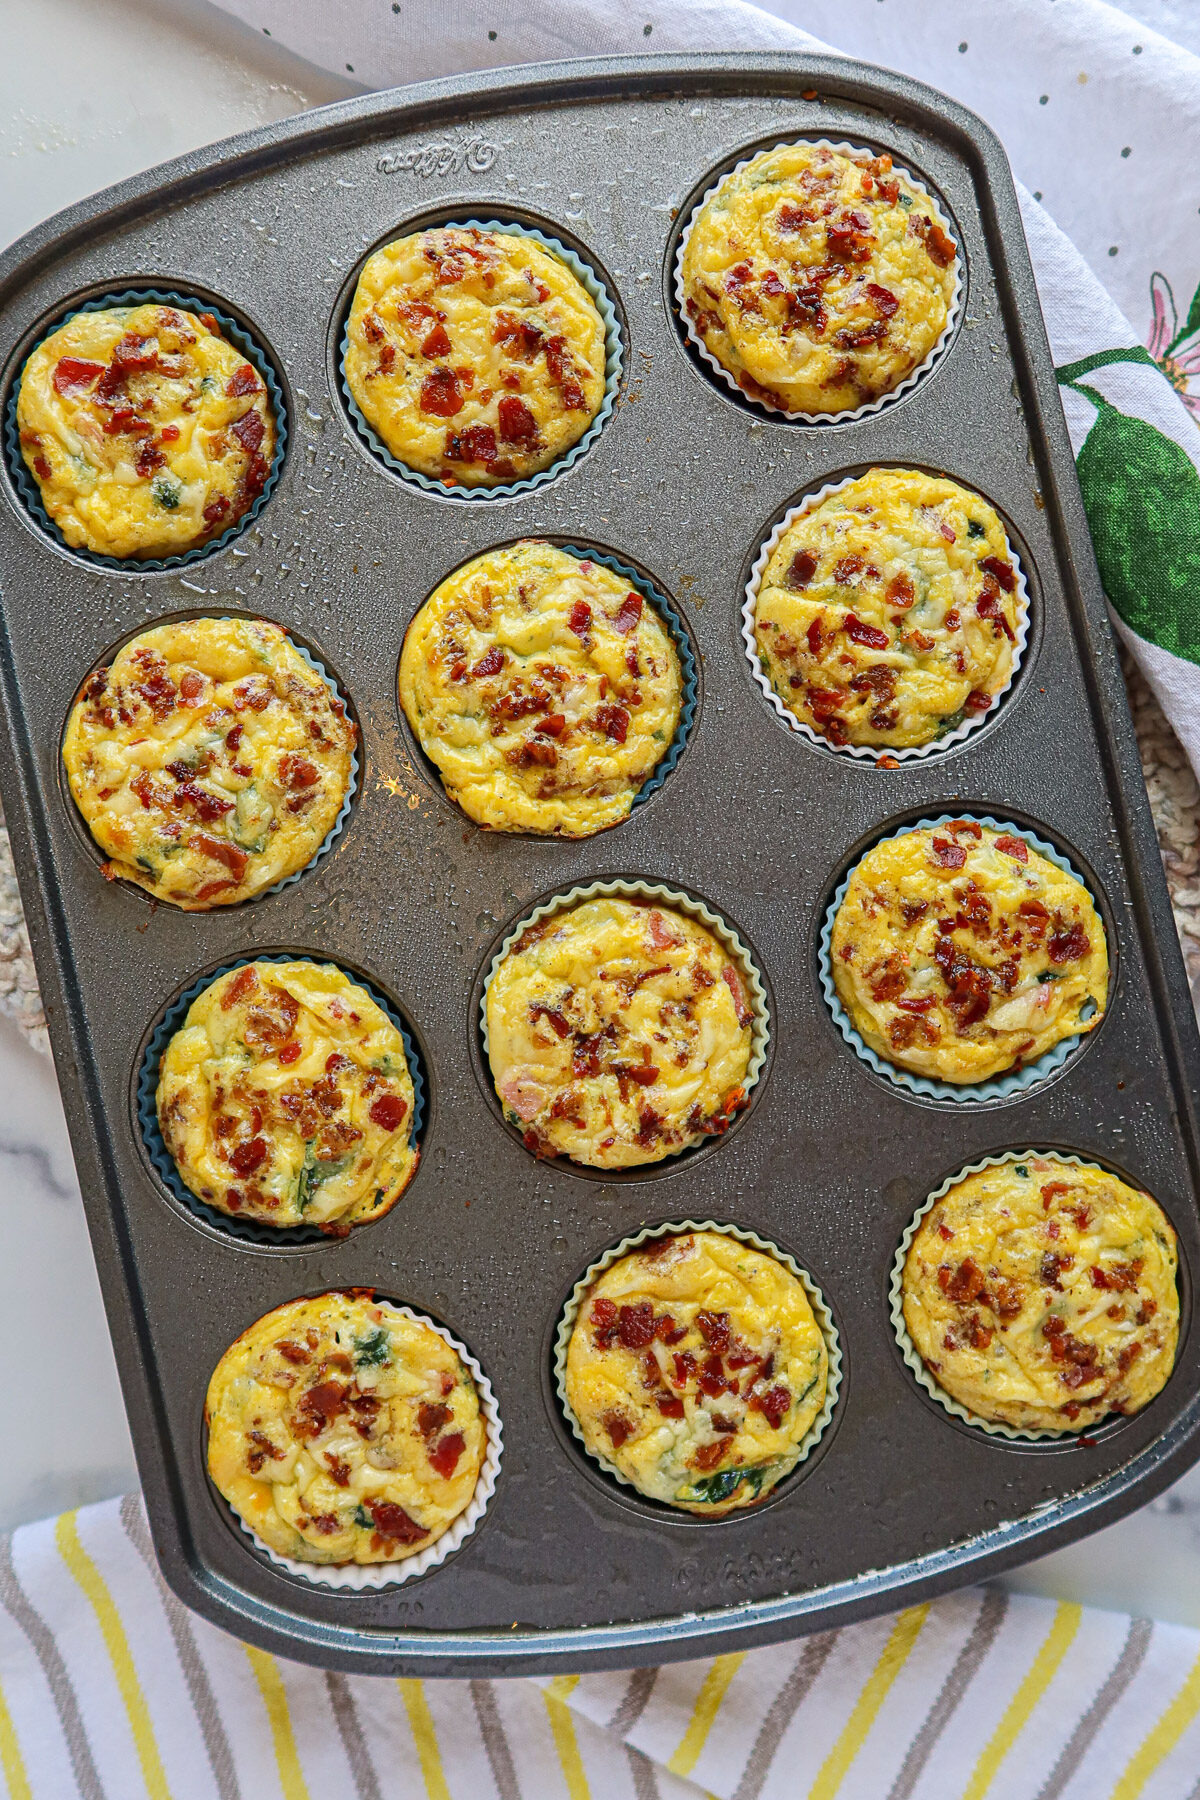 Baked crustless quiche muffins in a lined muffin pan.